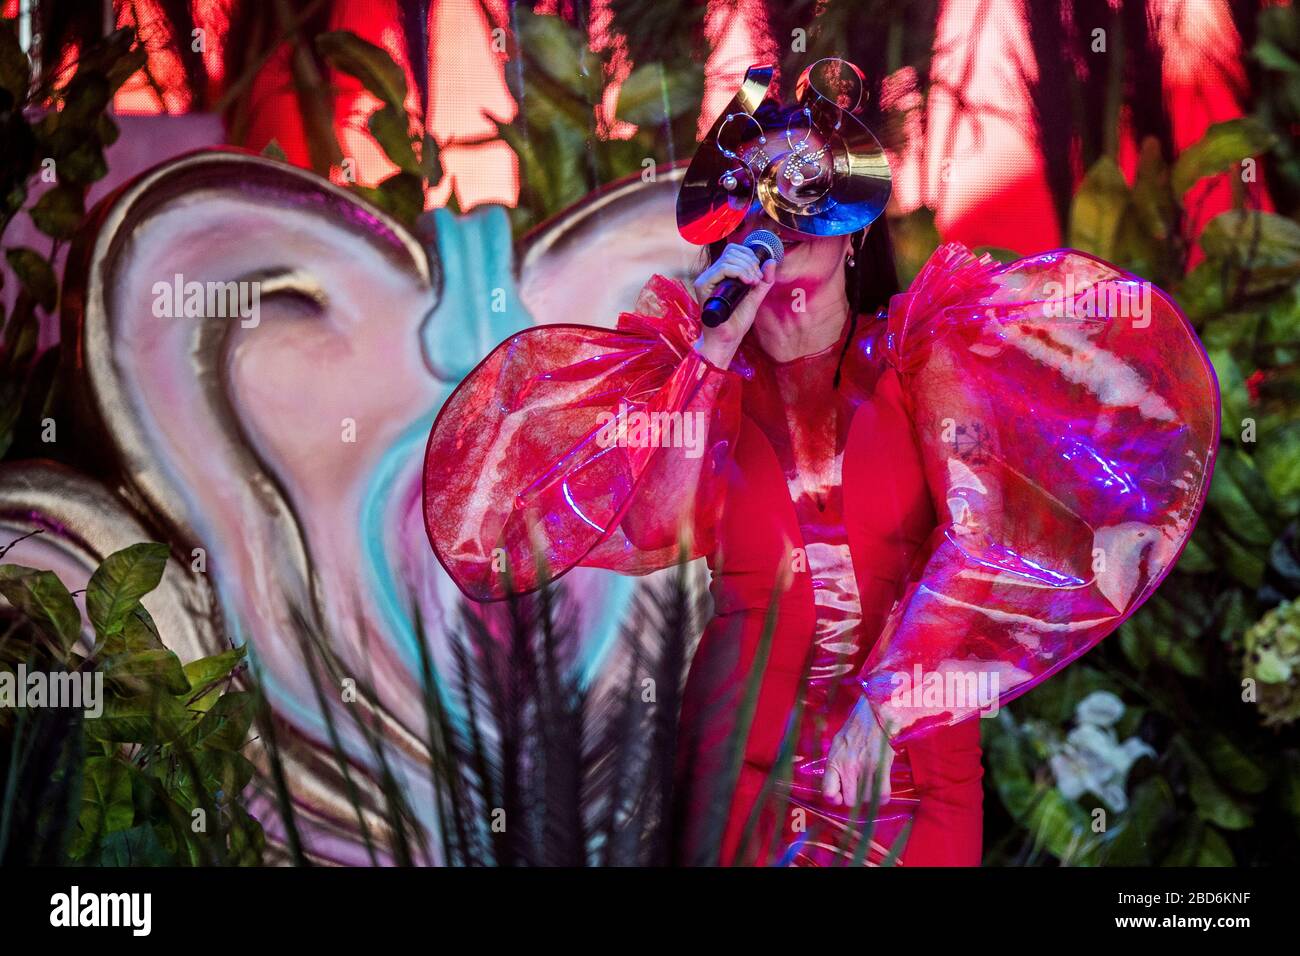 Aarhus, Denmark. 07th, June 2018. The Icelandic singer and songwriter Björk performs a live concert during the Danish music festival Northside 2018 in Aarhus. (Photo credit: Gonzales Photo - Lasse Lagoni). Stock Photo